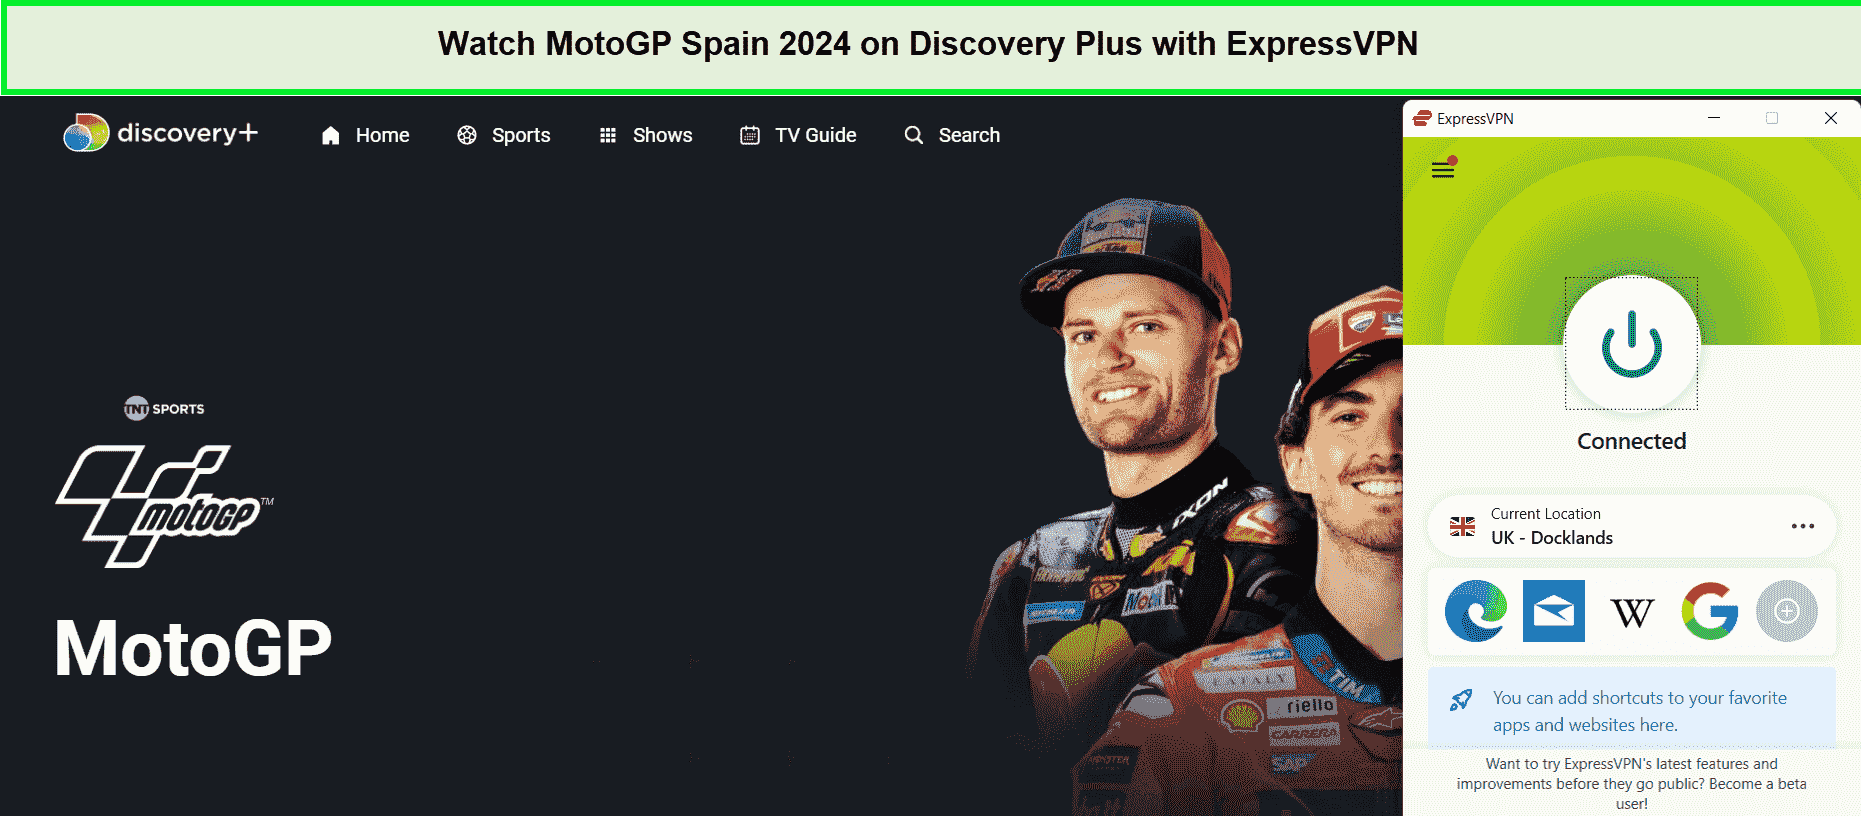 Watch-MotoGP-Spain-2024-in-Spain]-on-Discovery-Plus-with-ExpressVPN!